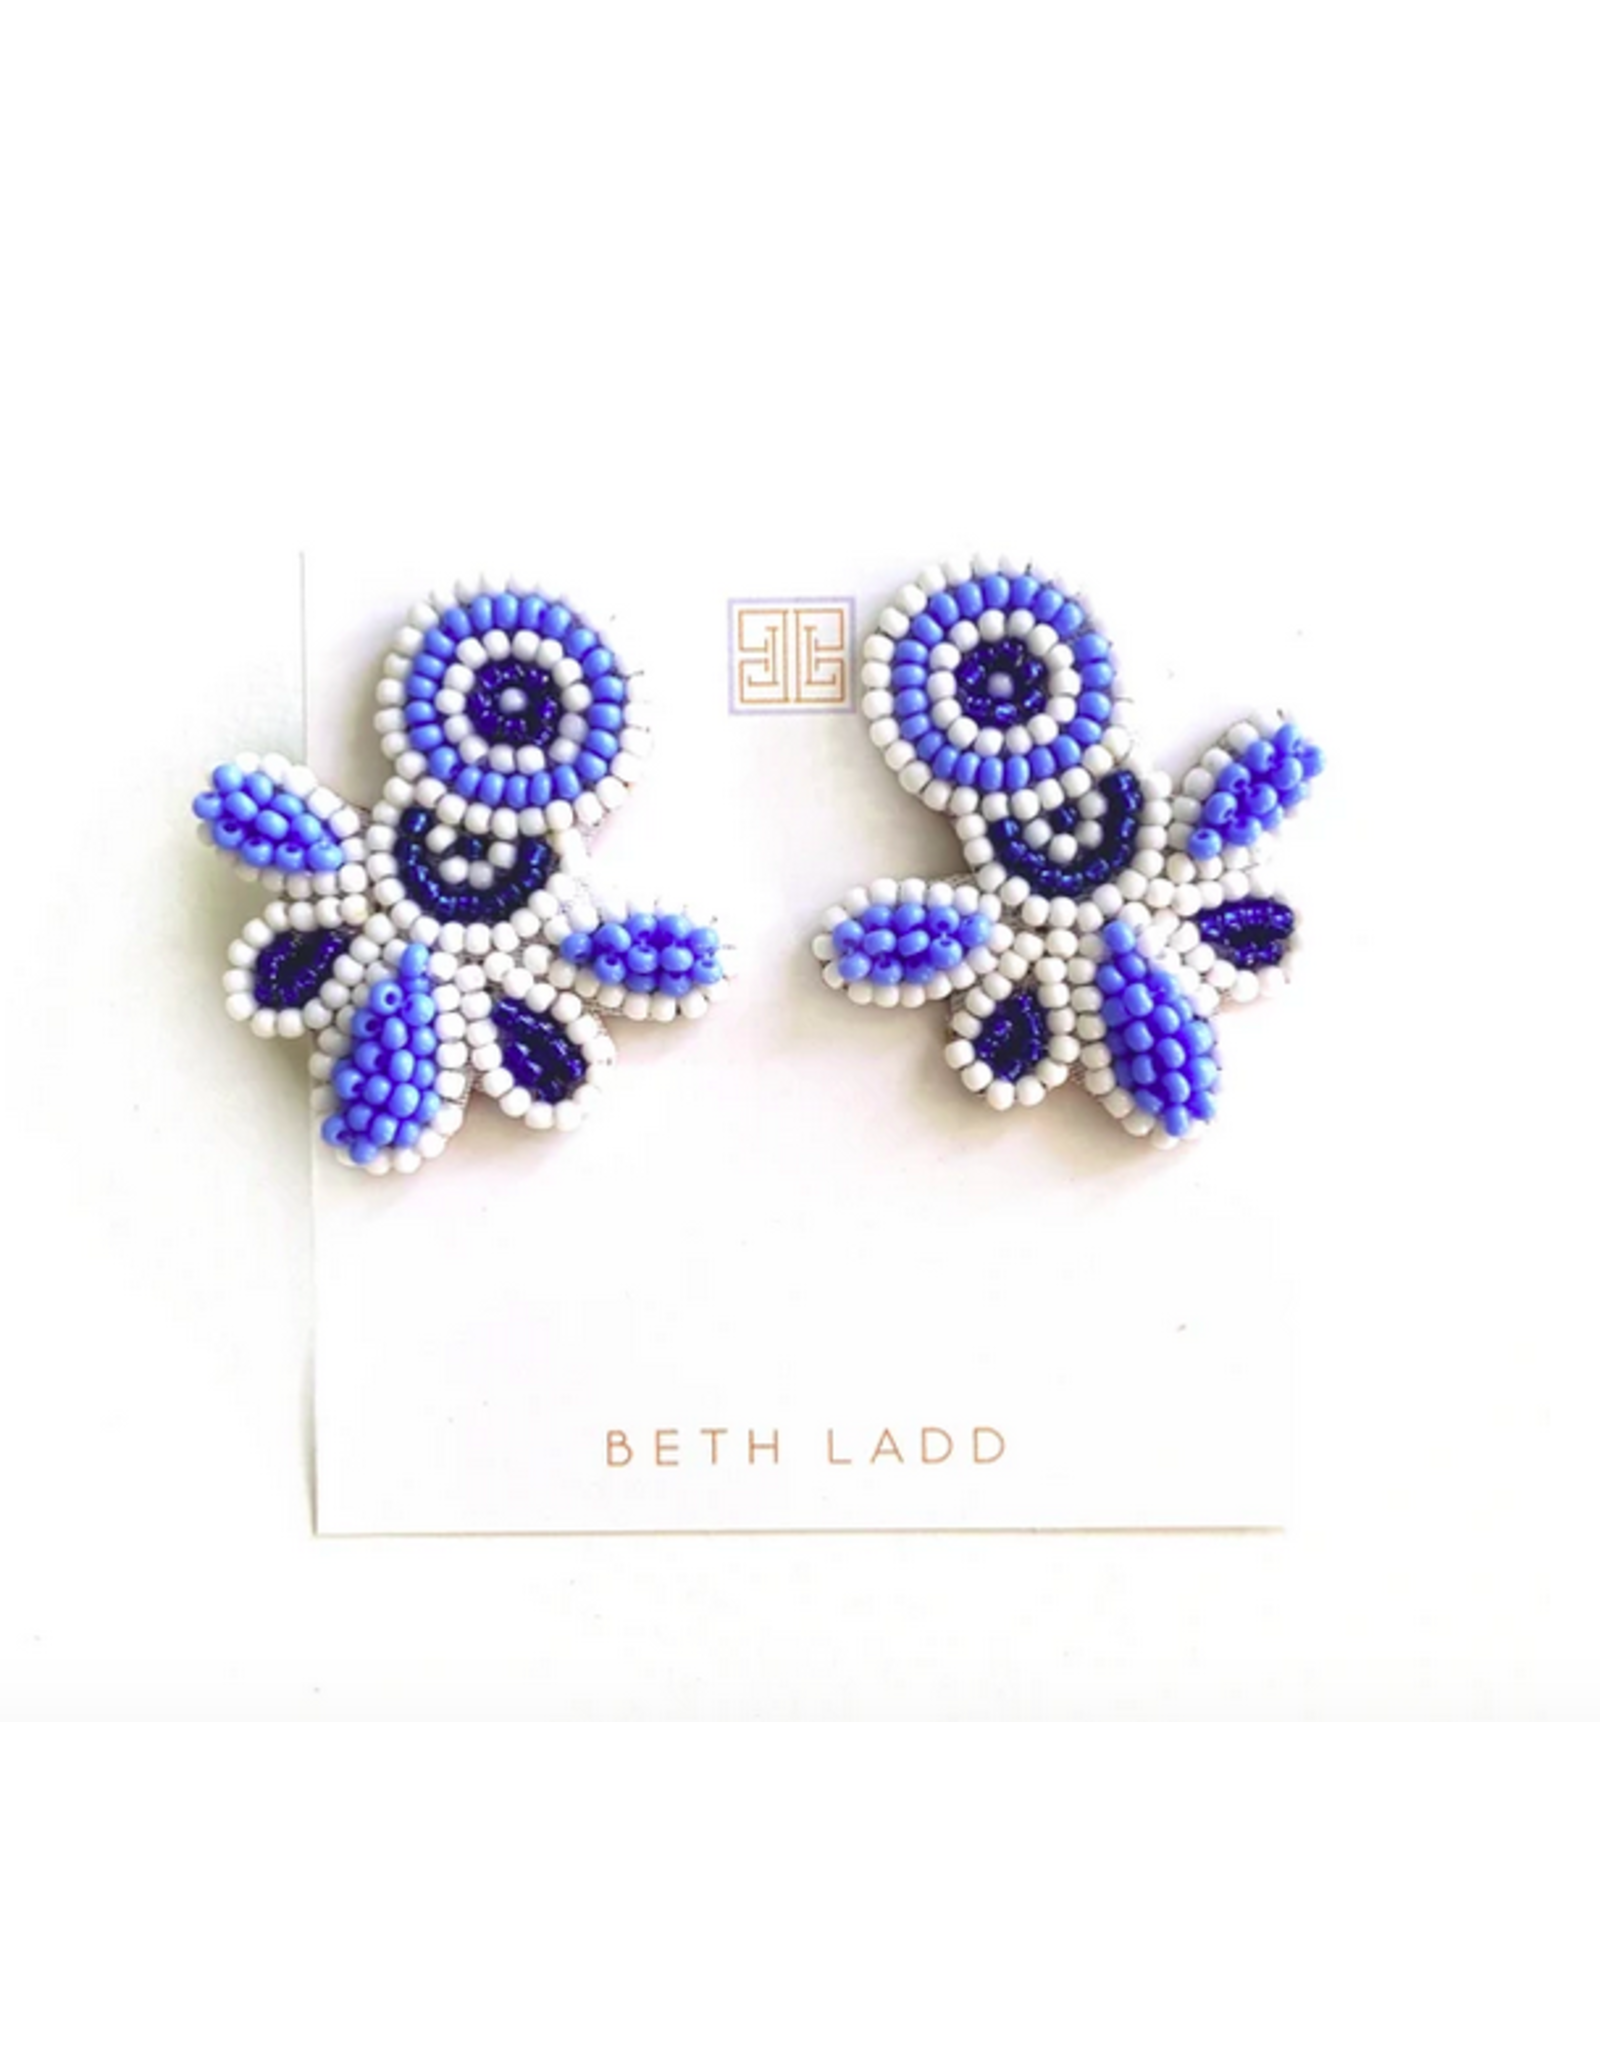 Beth Ladd Collection Love Studs in Navy/Periwinkle/White by Beth Ladd